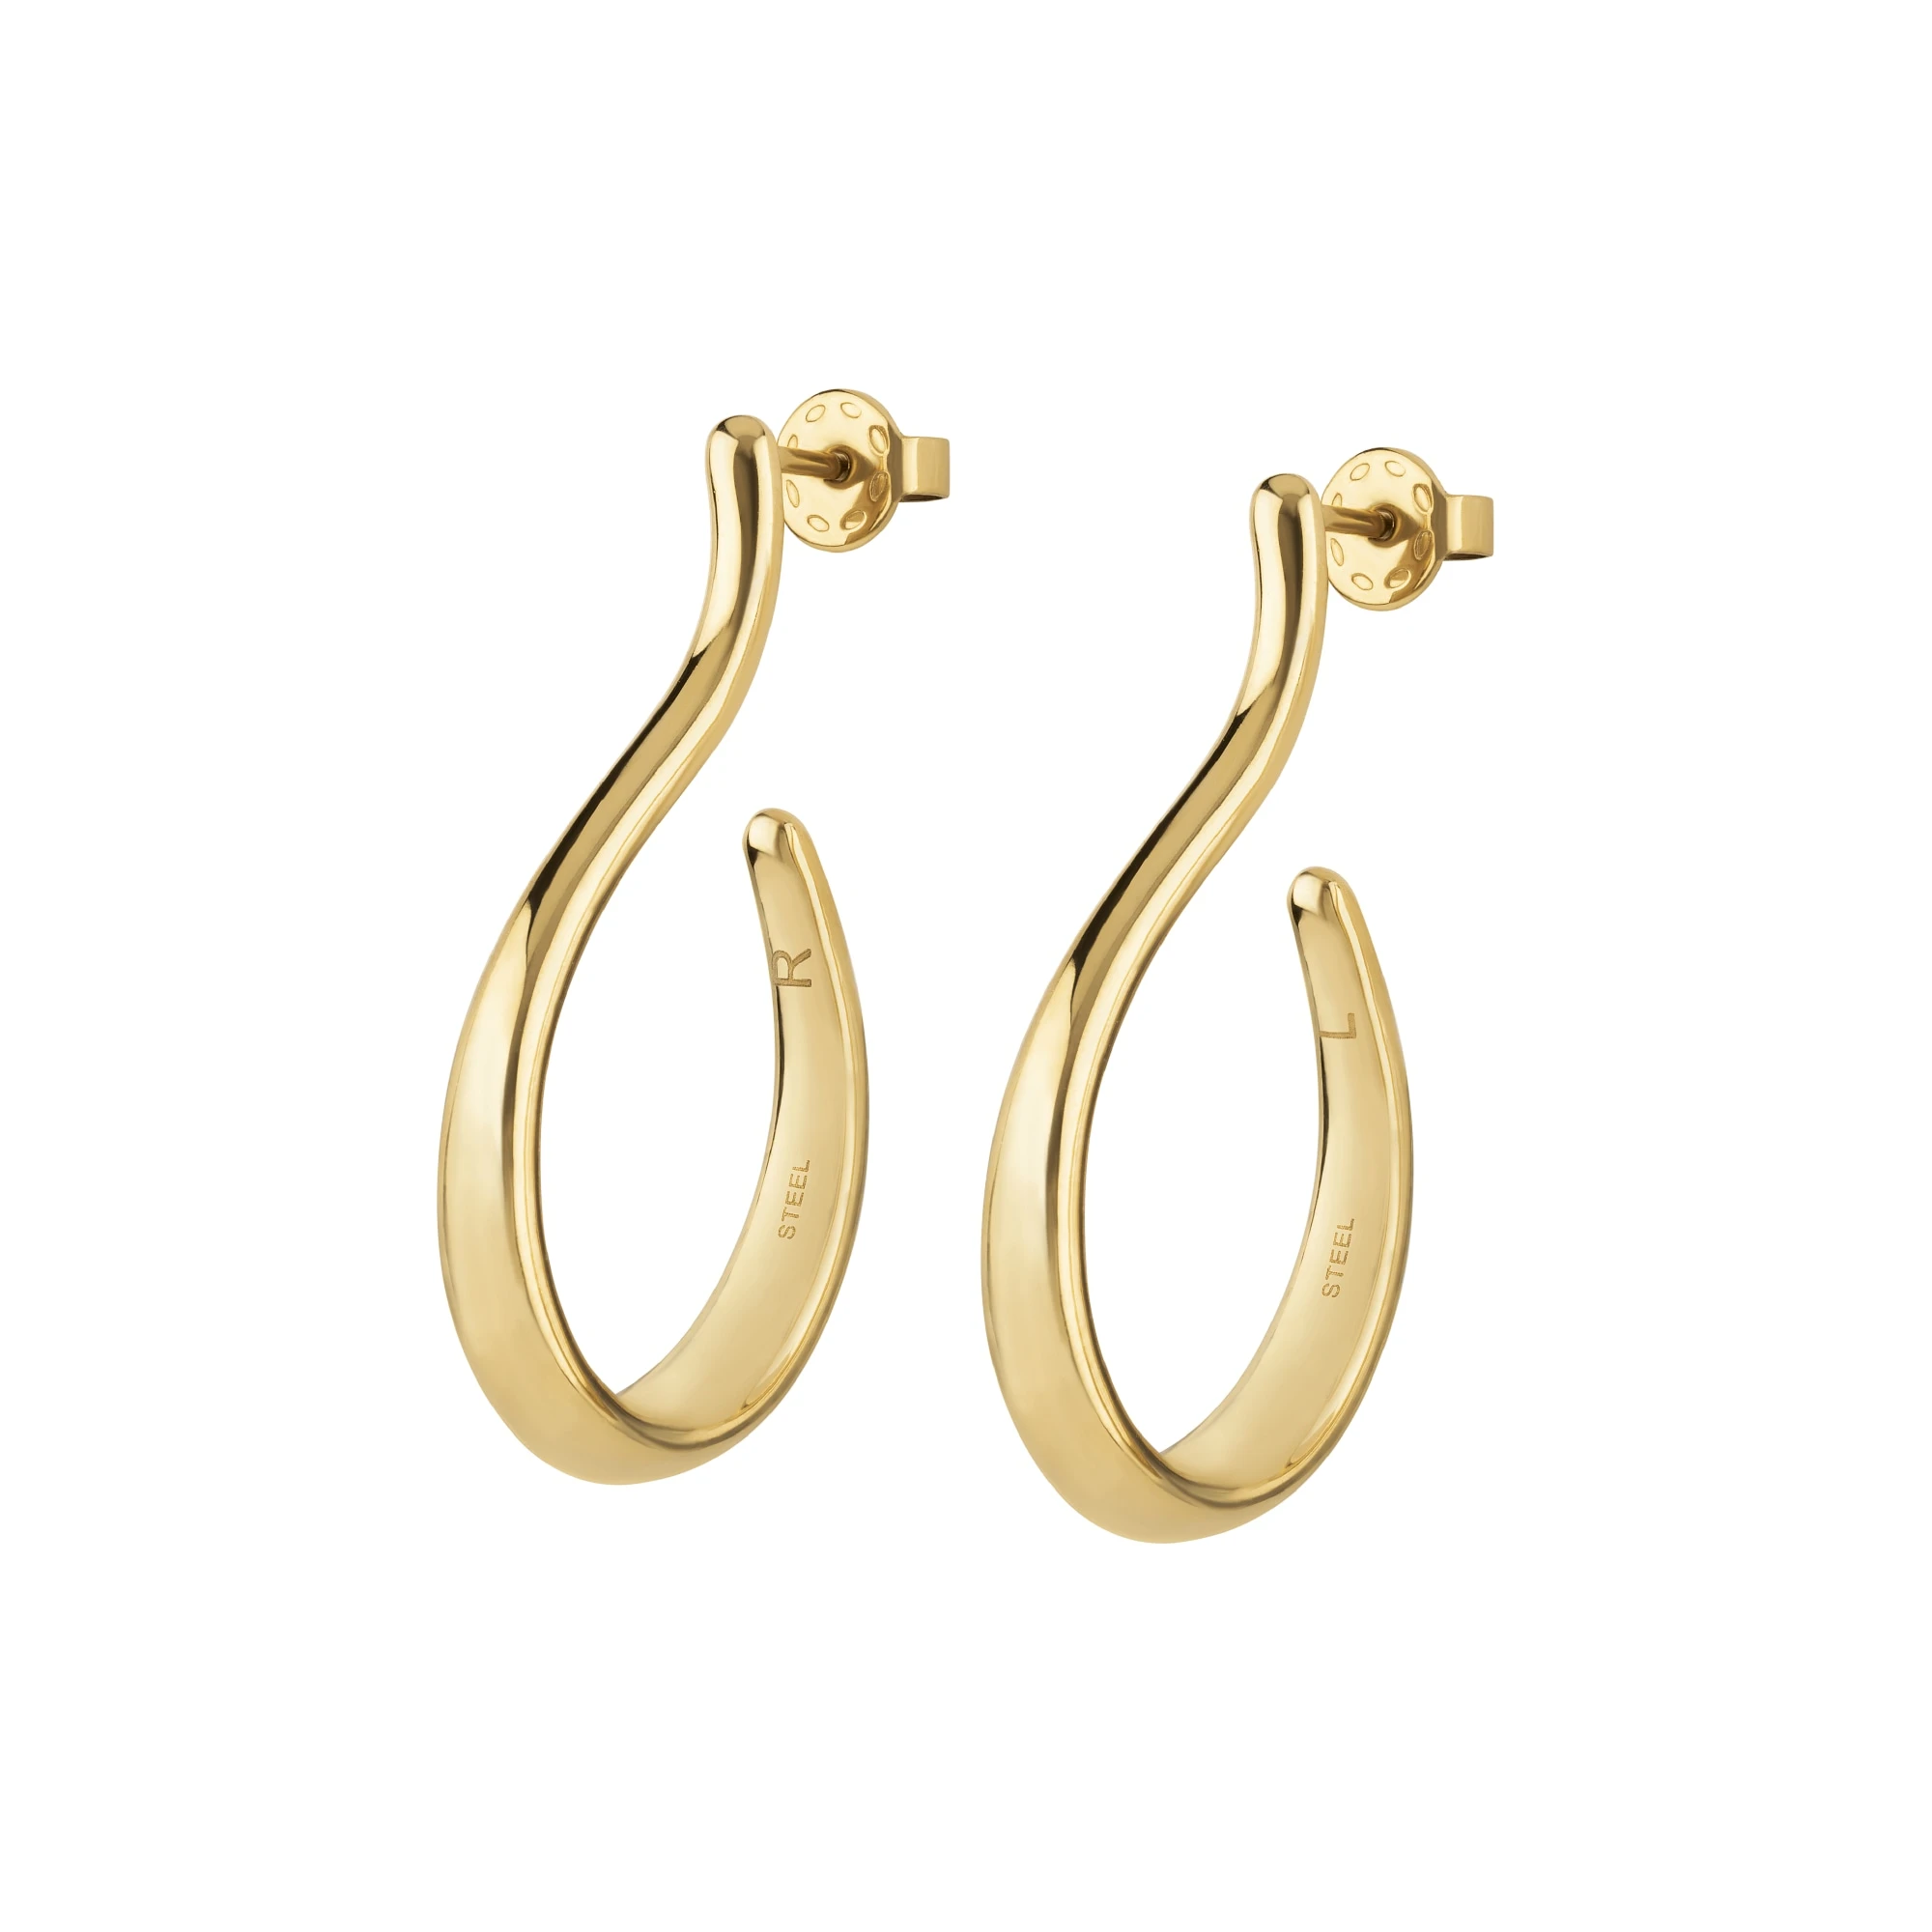 MY LUCKY COLLECTION - ATTRACTIVE EARRINGS BY GIULIA SALEMI - 1 - TJ3186 | Breil